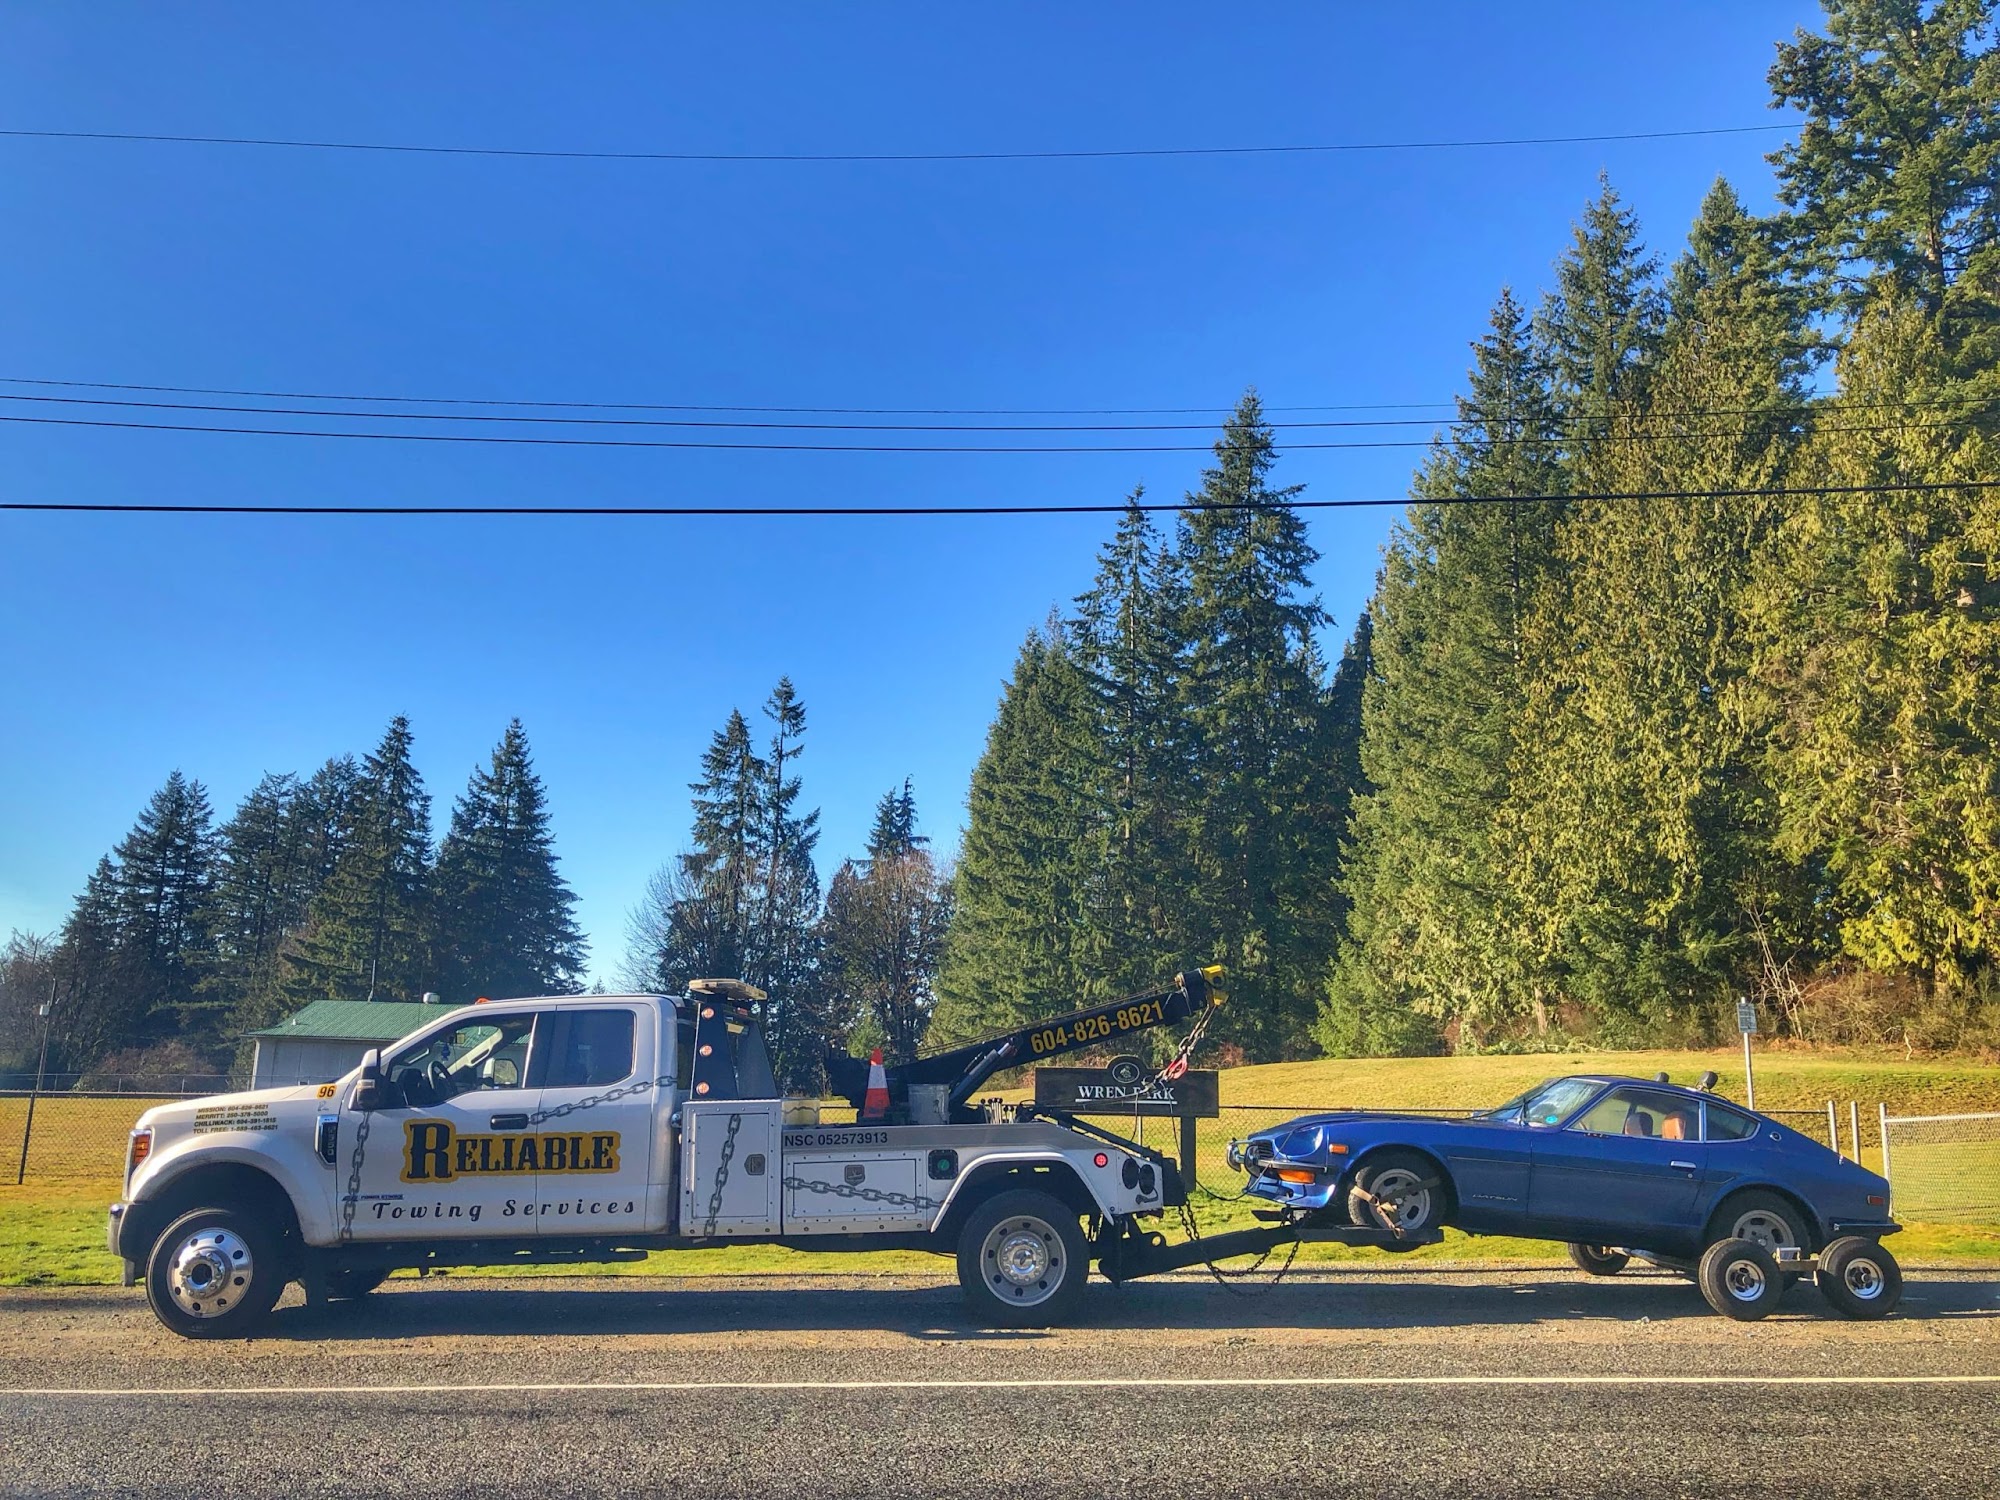 Reliable Towing Services